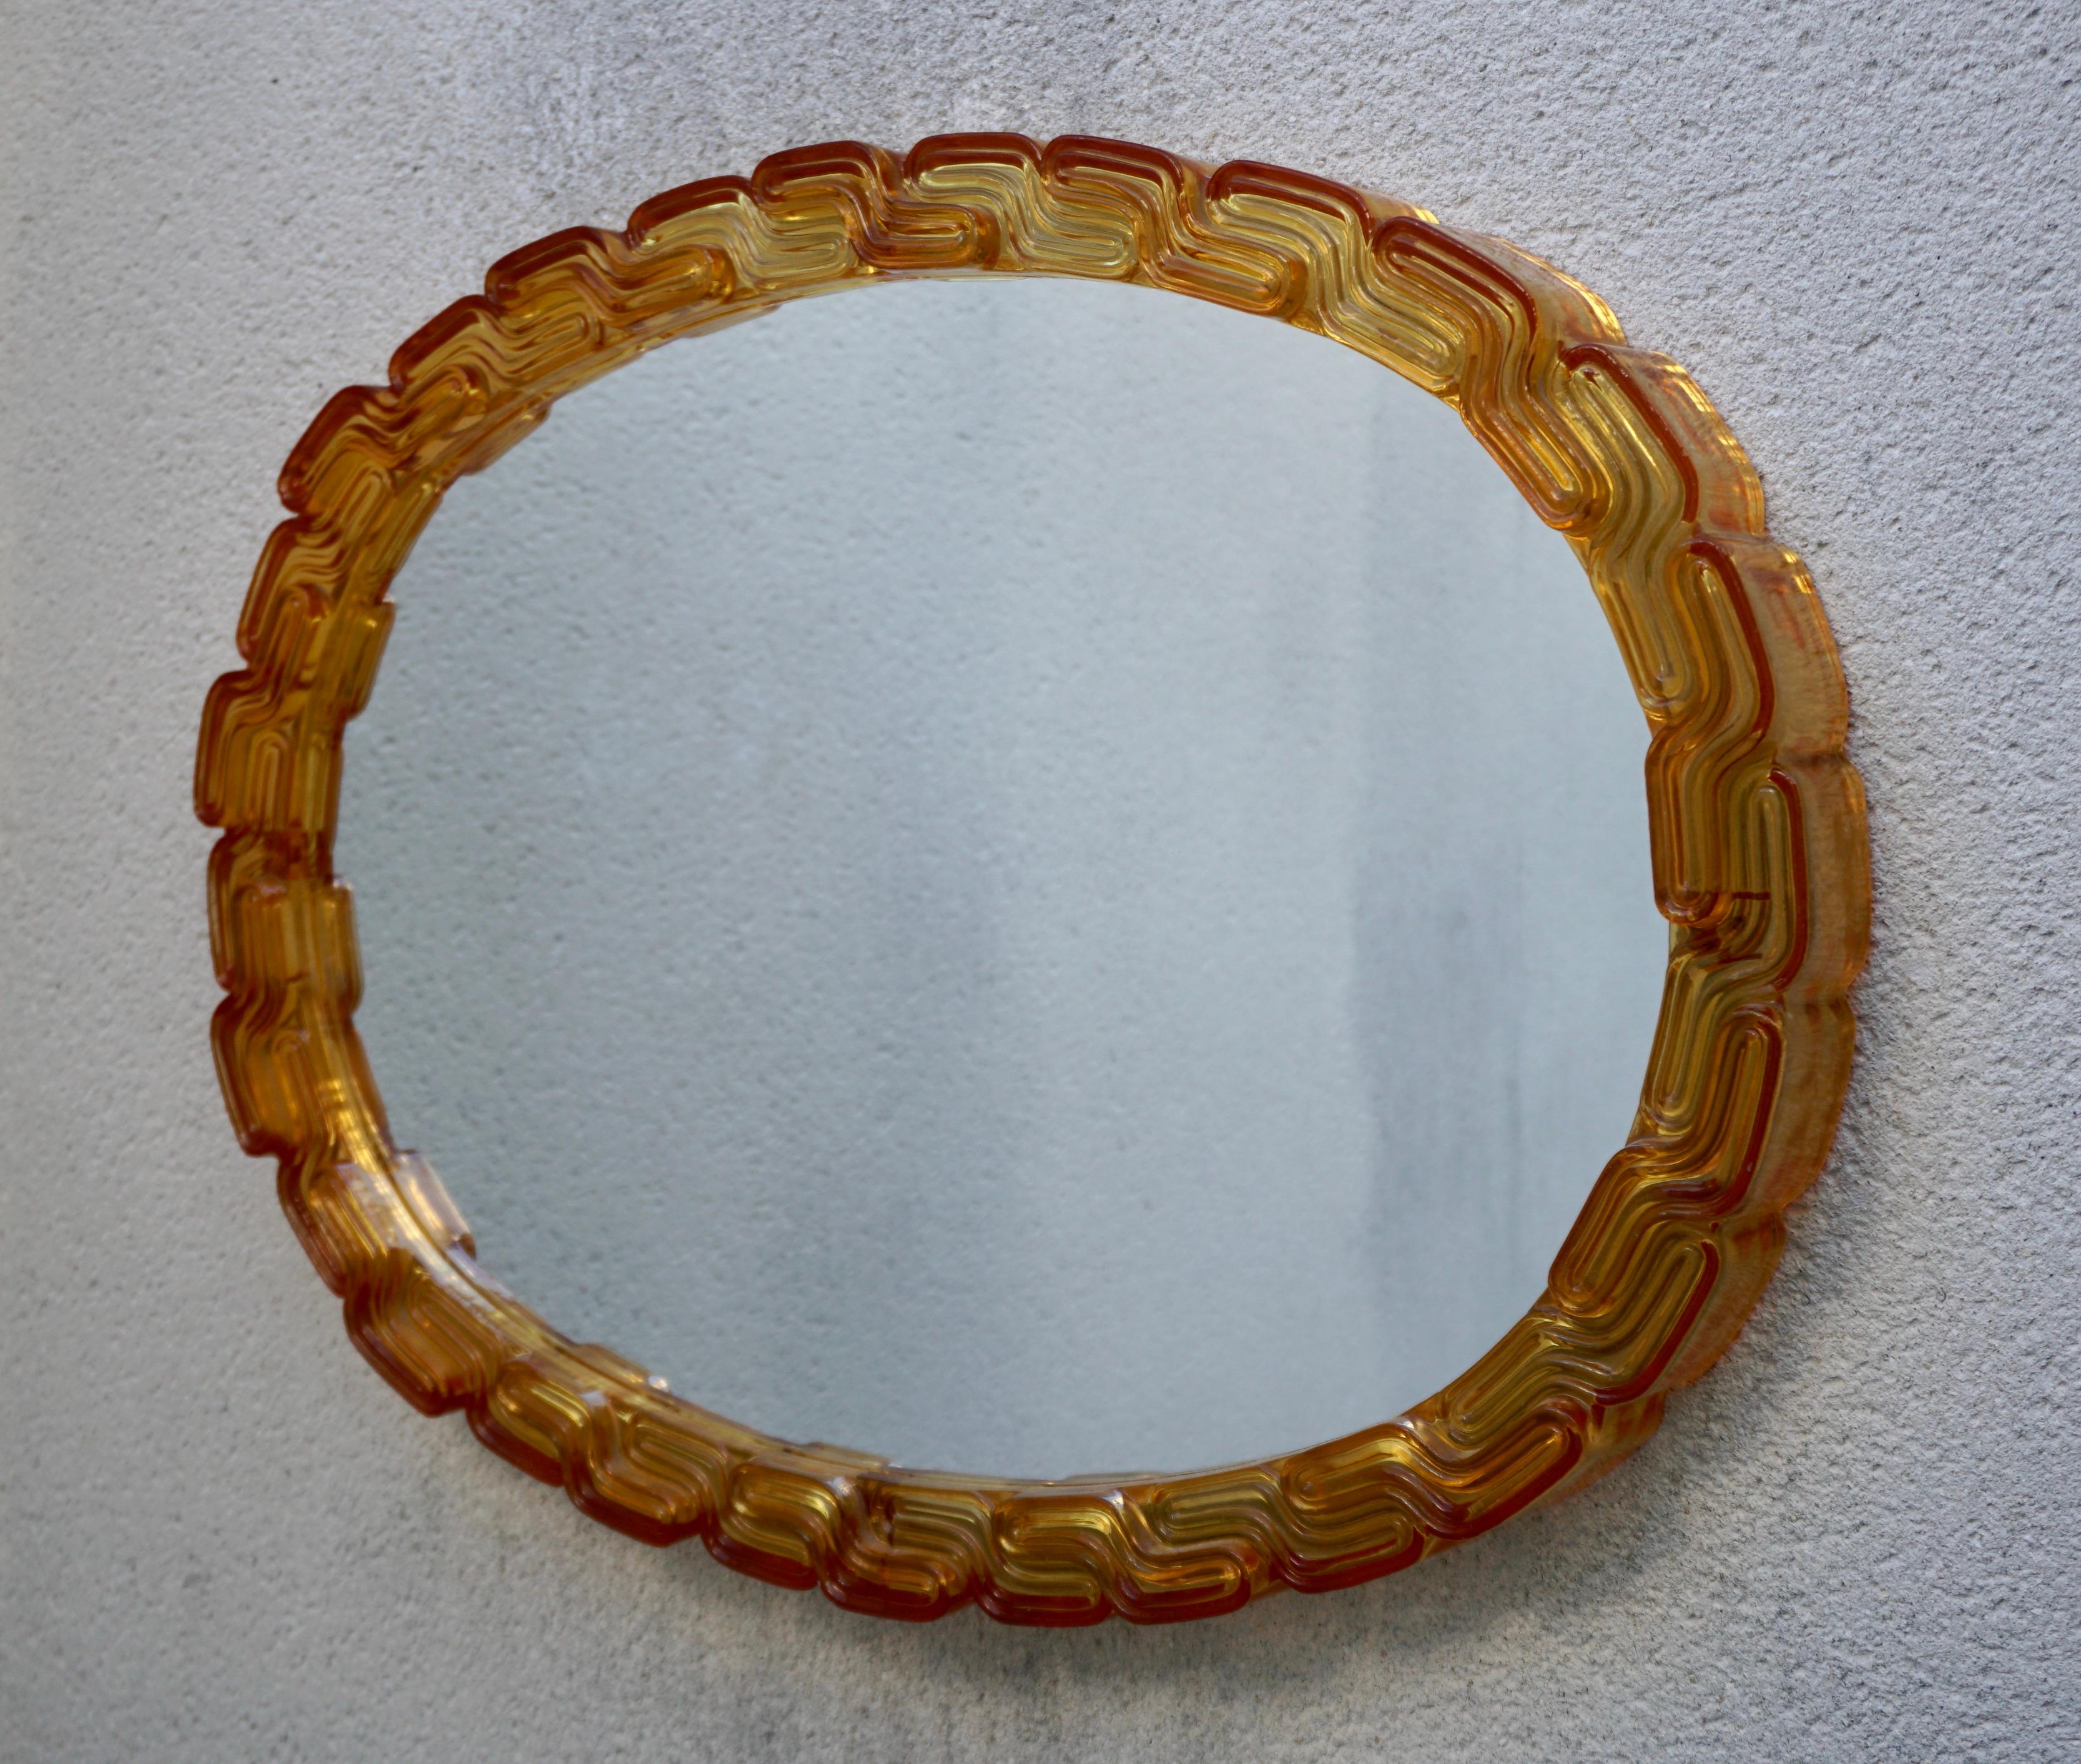 An oval acrylic wall mirror made in the 1970s in Italy. The mirror has an oval acrylic design in an amber orange color.

Width 26.7